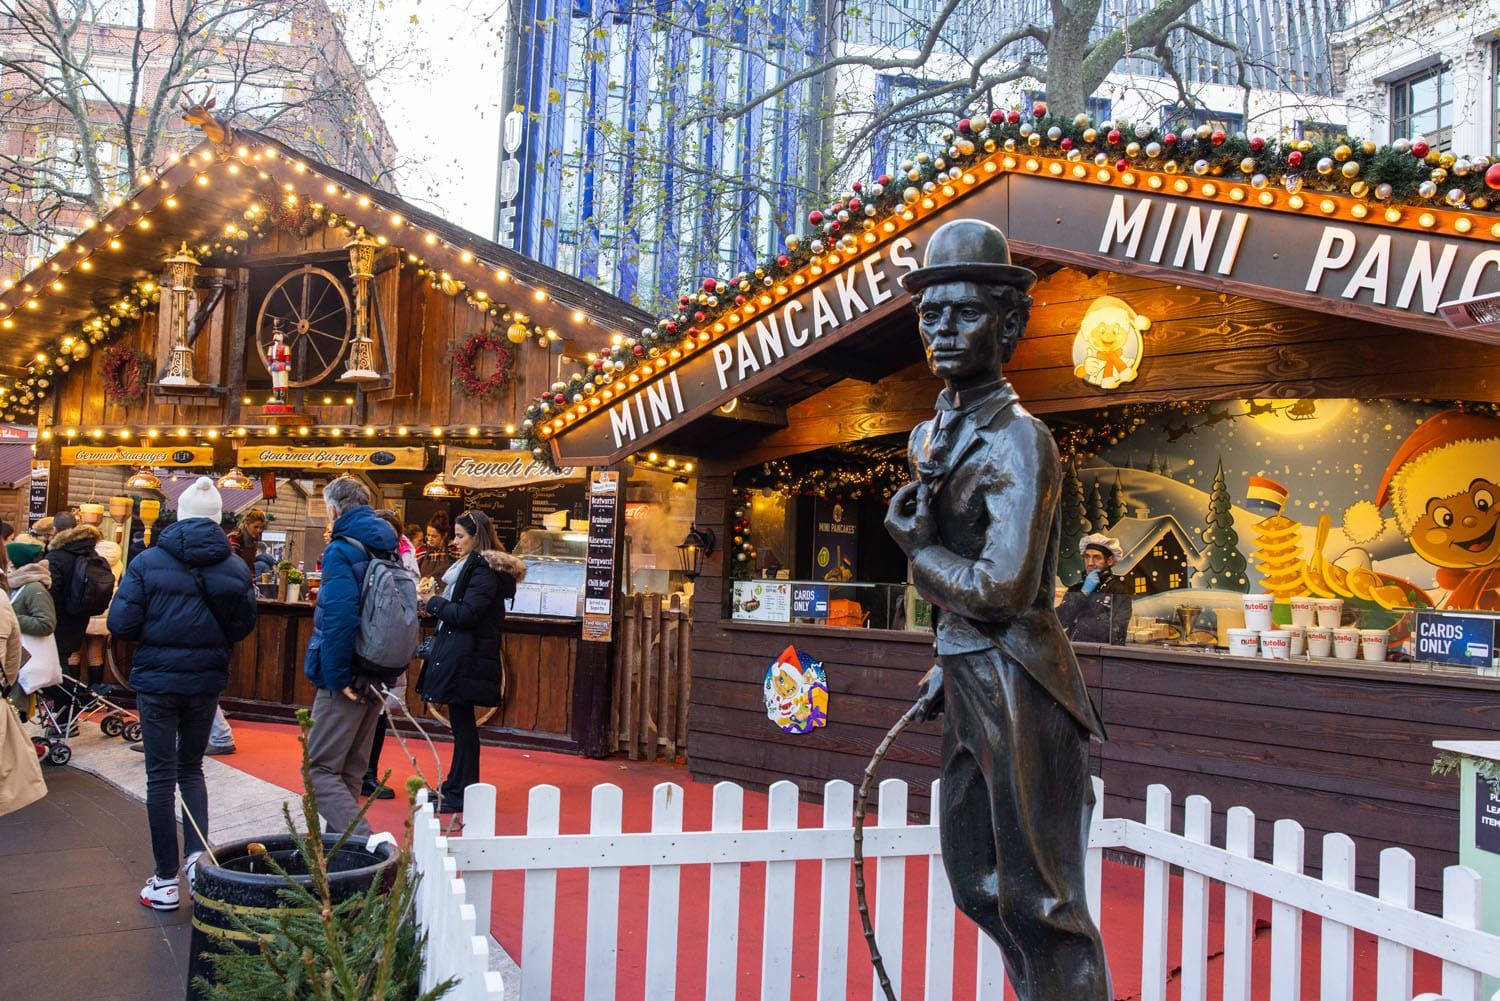 Leicester Square Christmas Market | London Christmas Markets